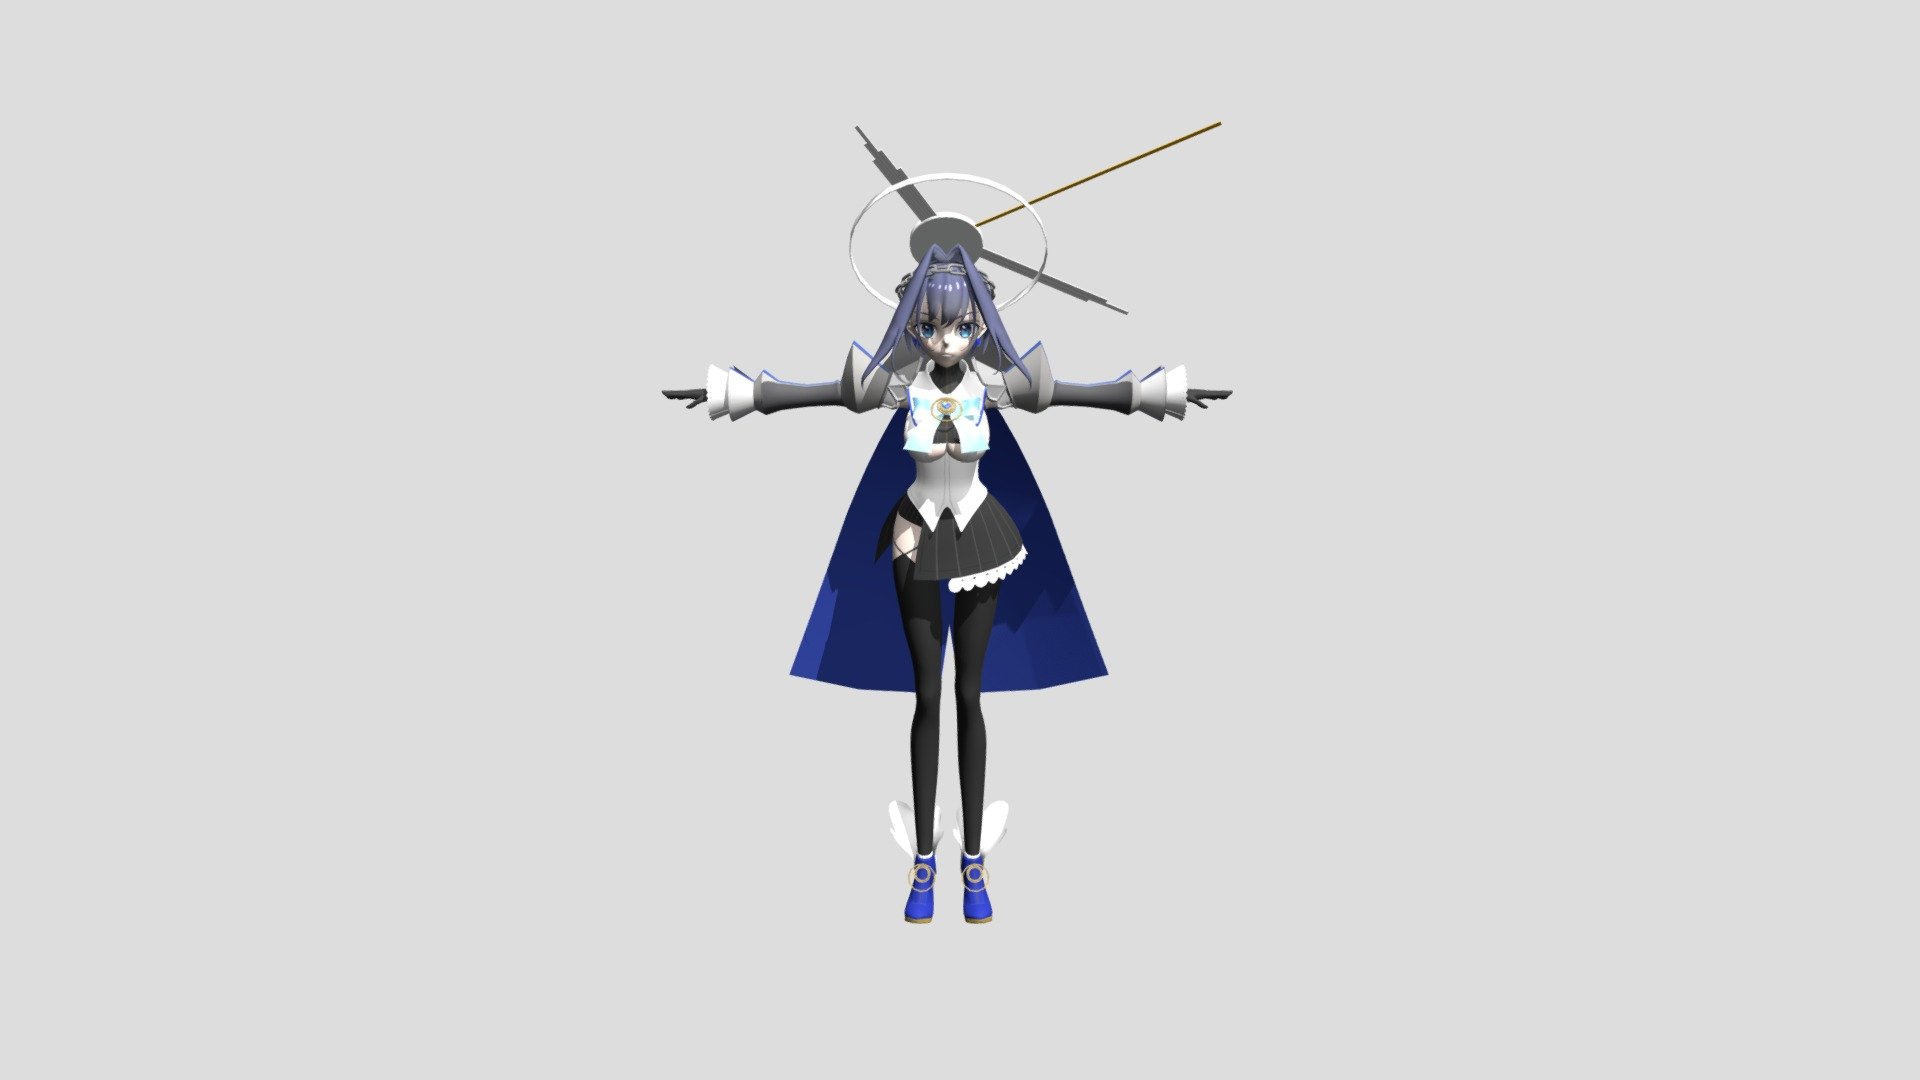 This was my first attempt at making a full body model of a vtuber!
I plan on rigging the character in Spring of 2023 along with my 3D animation class.
Rigged/Animated model will be uploaded in another post then 3d model